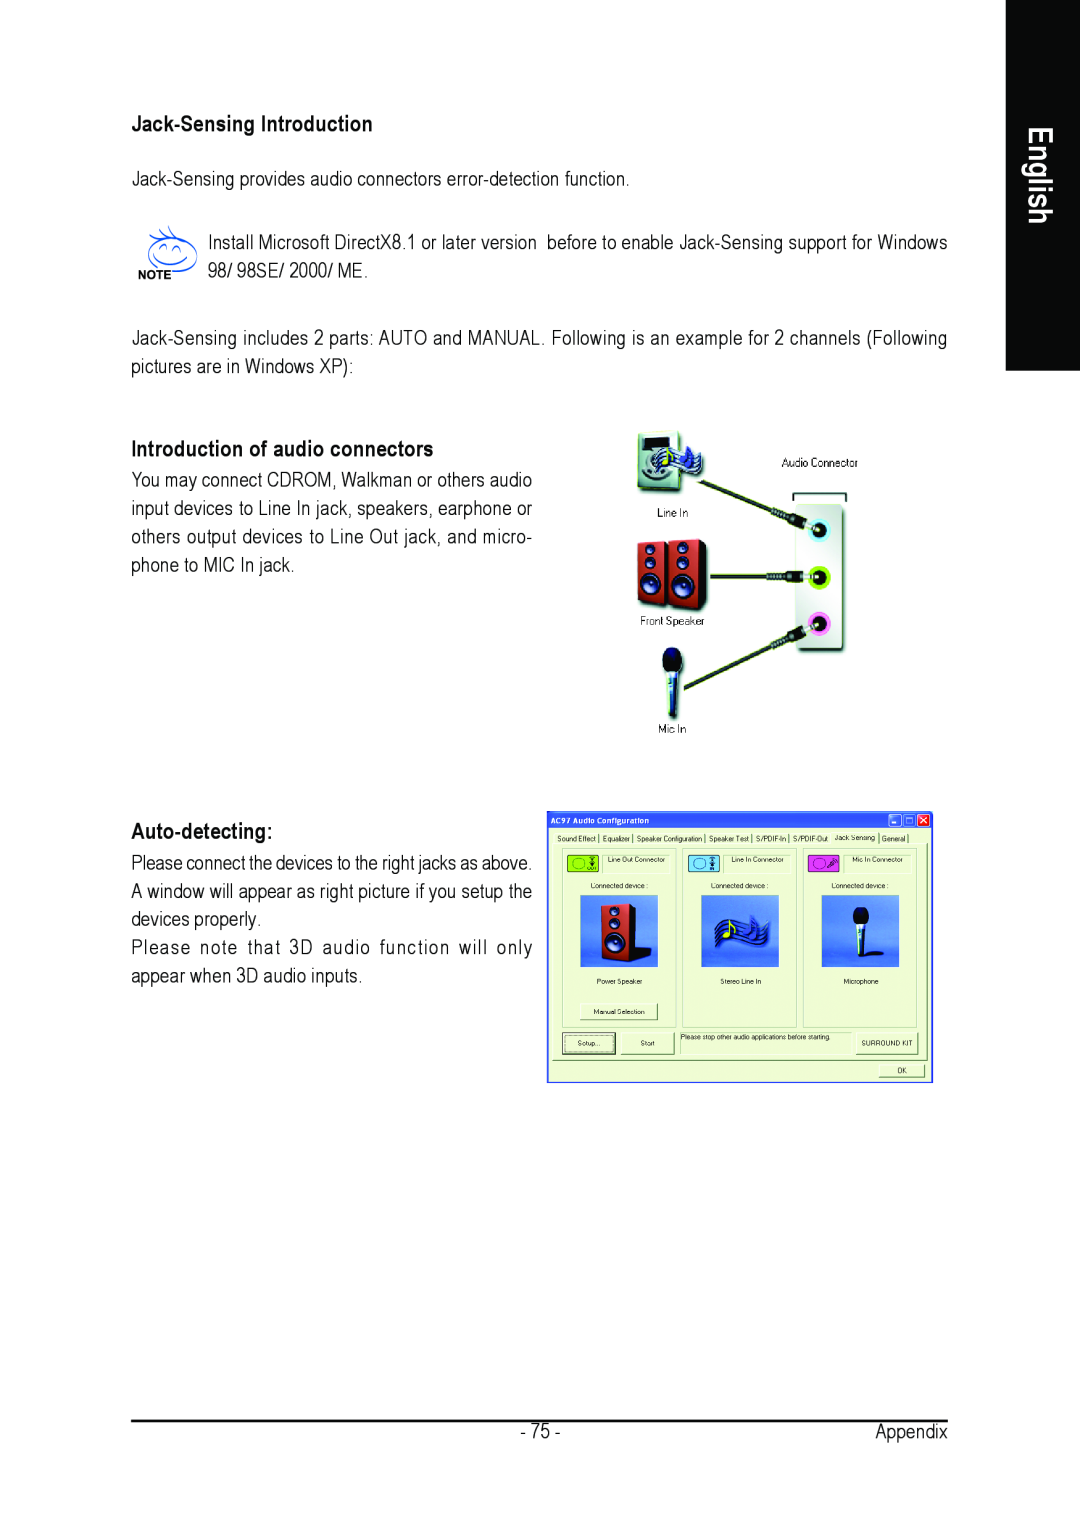 Gigabyte GA-7N400S-L user manual Jack-Sensing Introduction, Introduction of audio connectors, Auto-detecting, English 